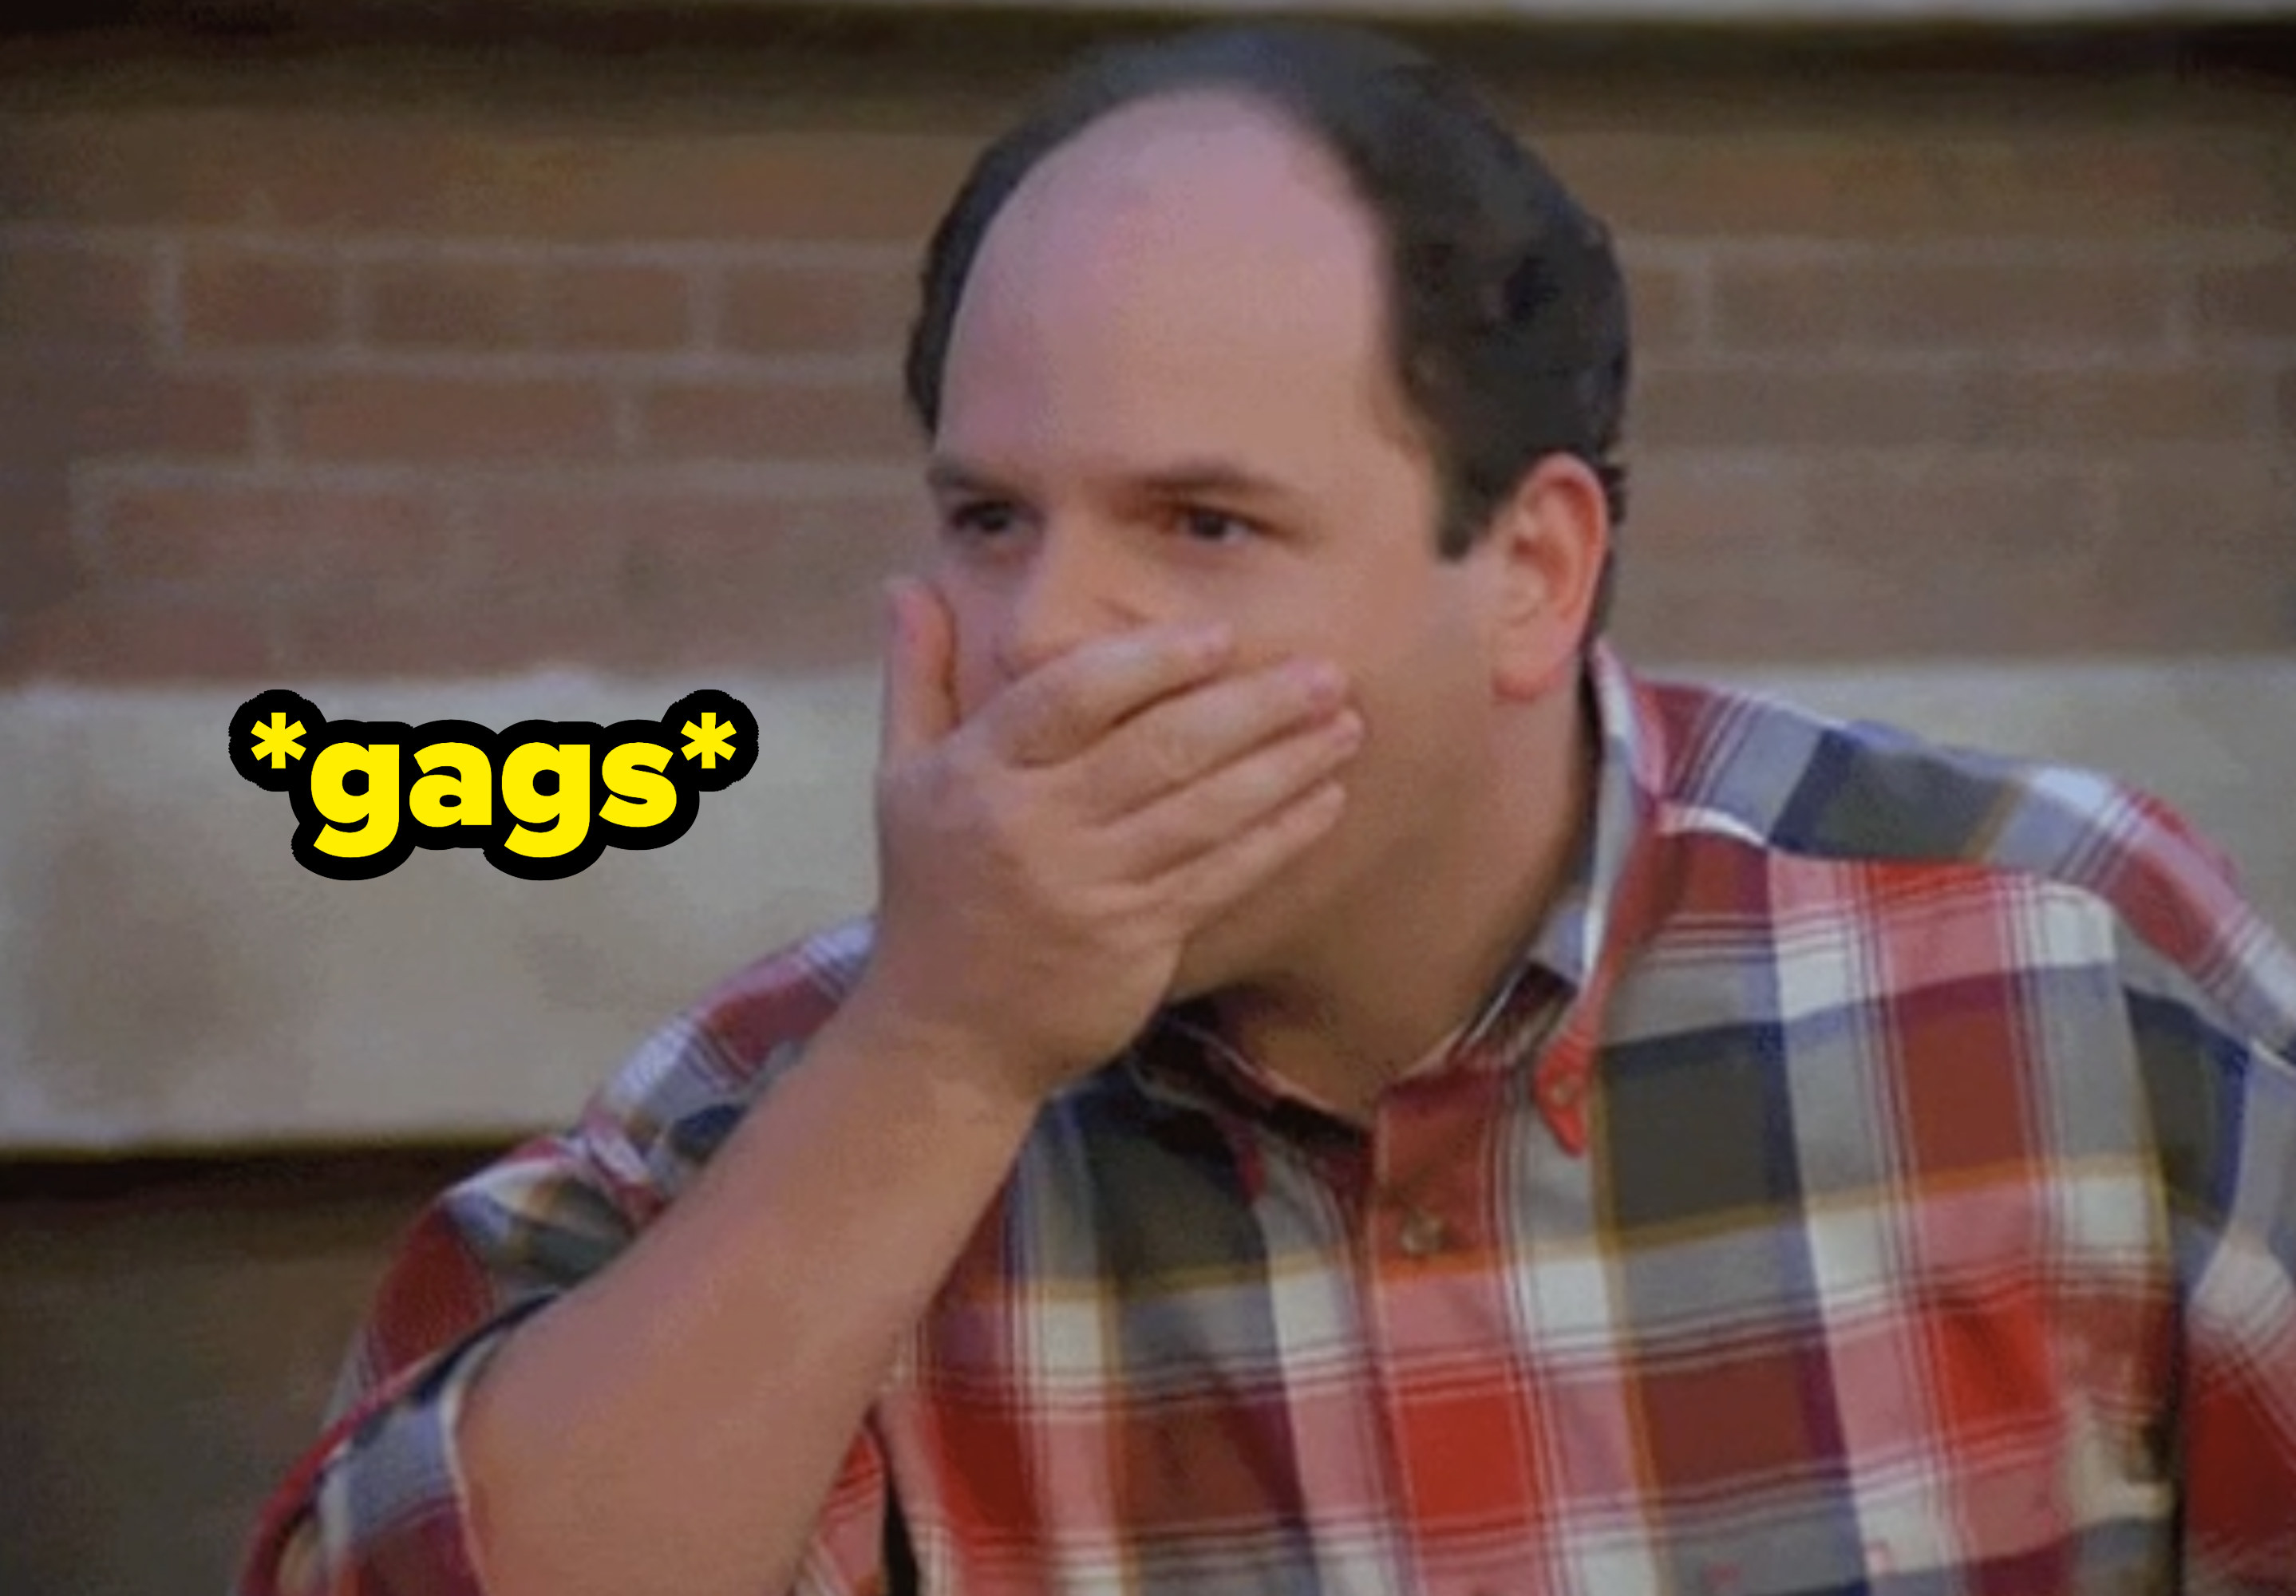 &quot;gags&quot; over george costanza covering his mouth